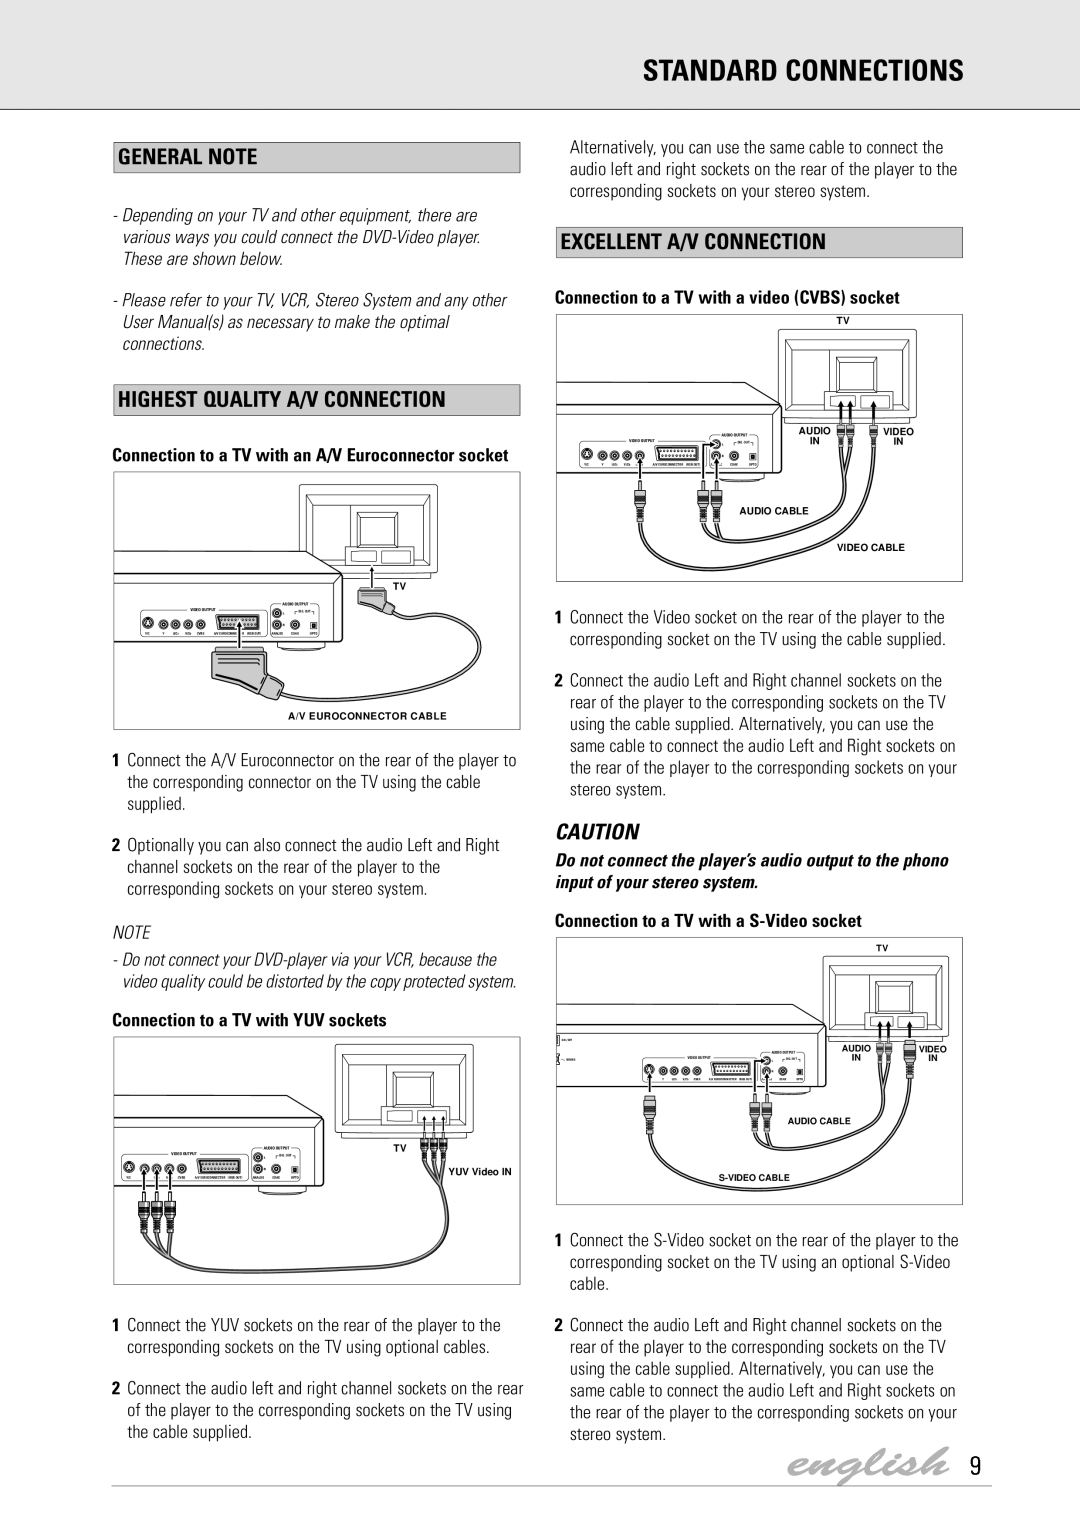 Dolby Laboratories DVD Video Standard Connections, General Note, Highest Quality A/V Connection, Excellent A/V Connection 